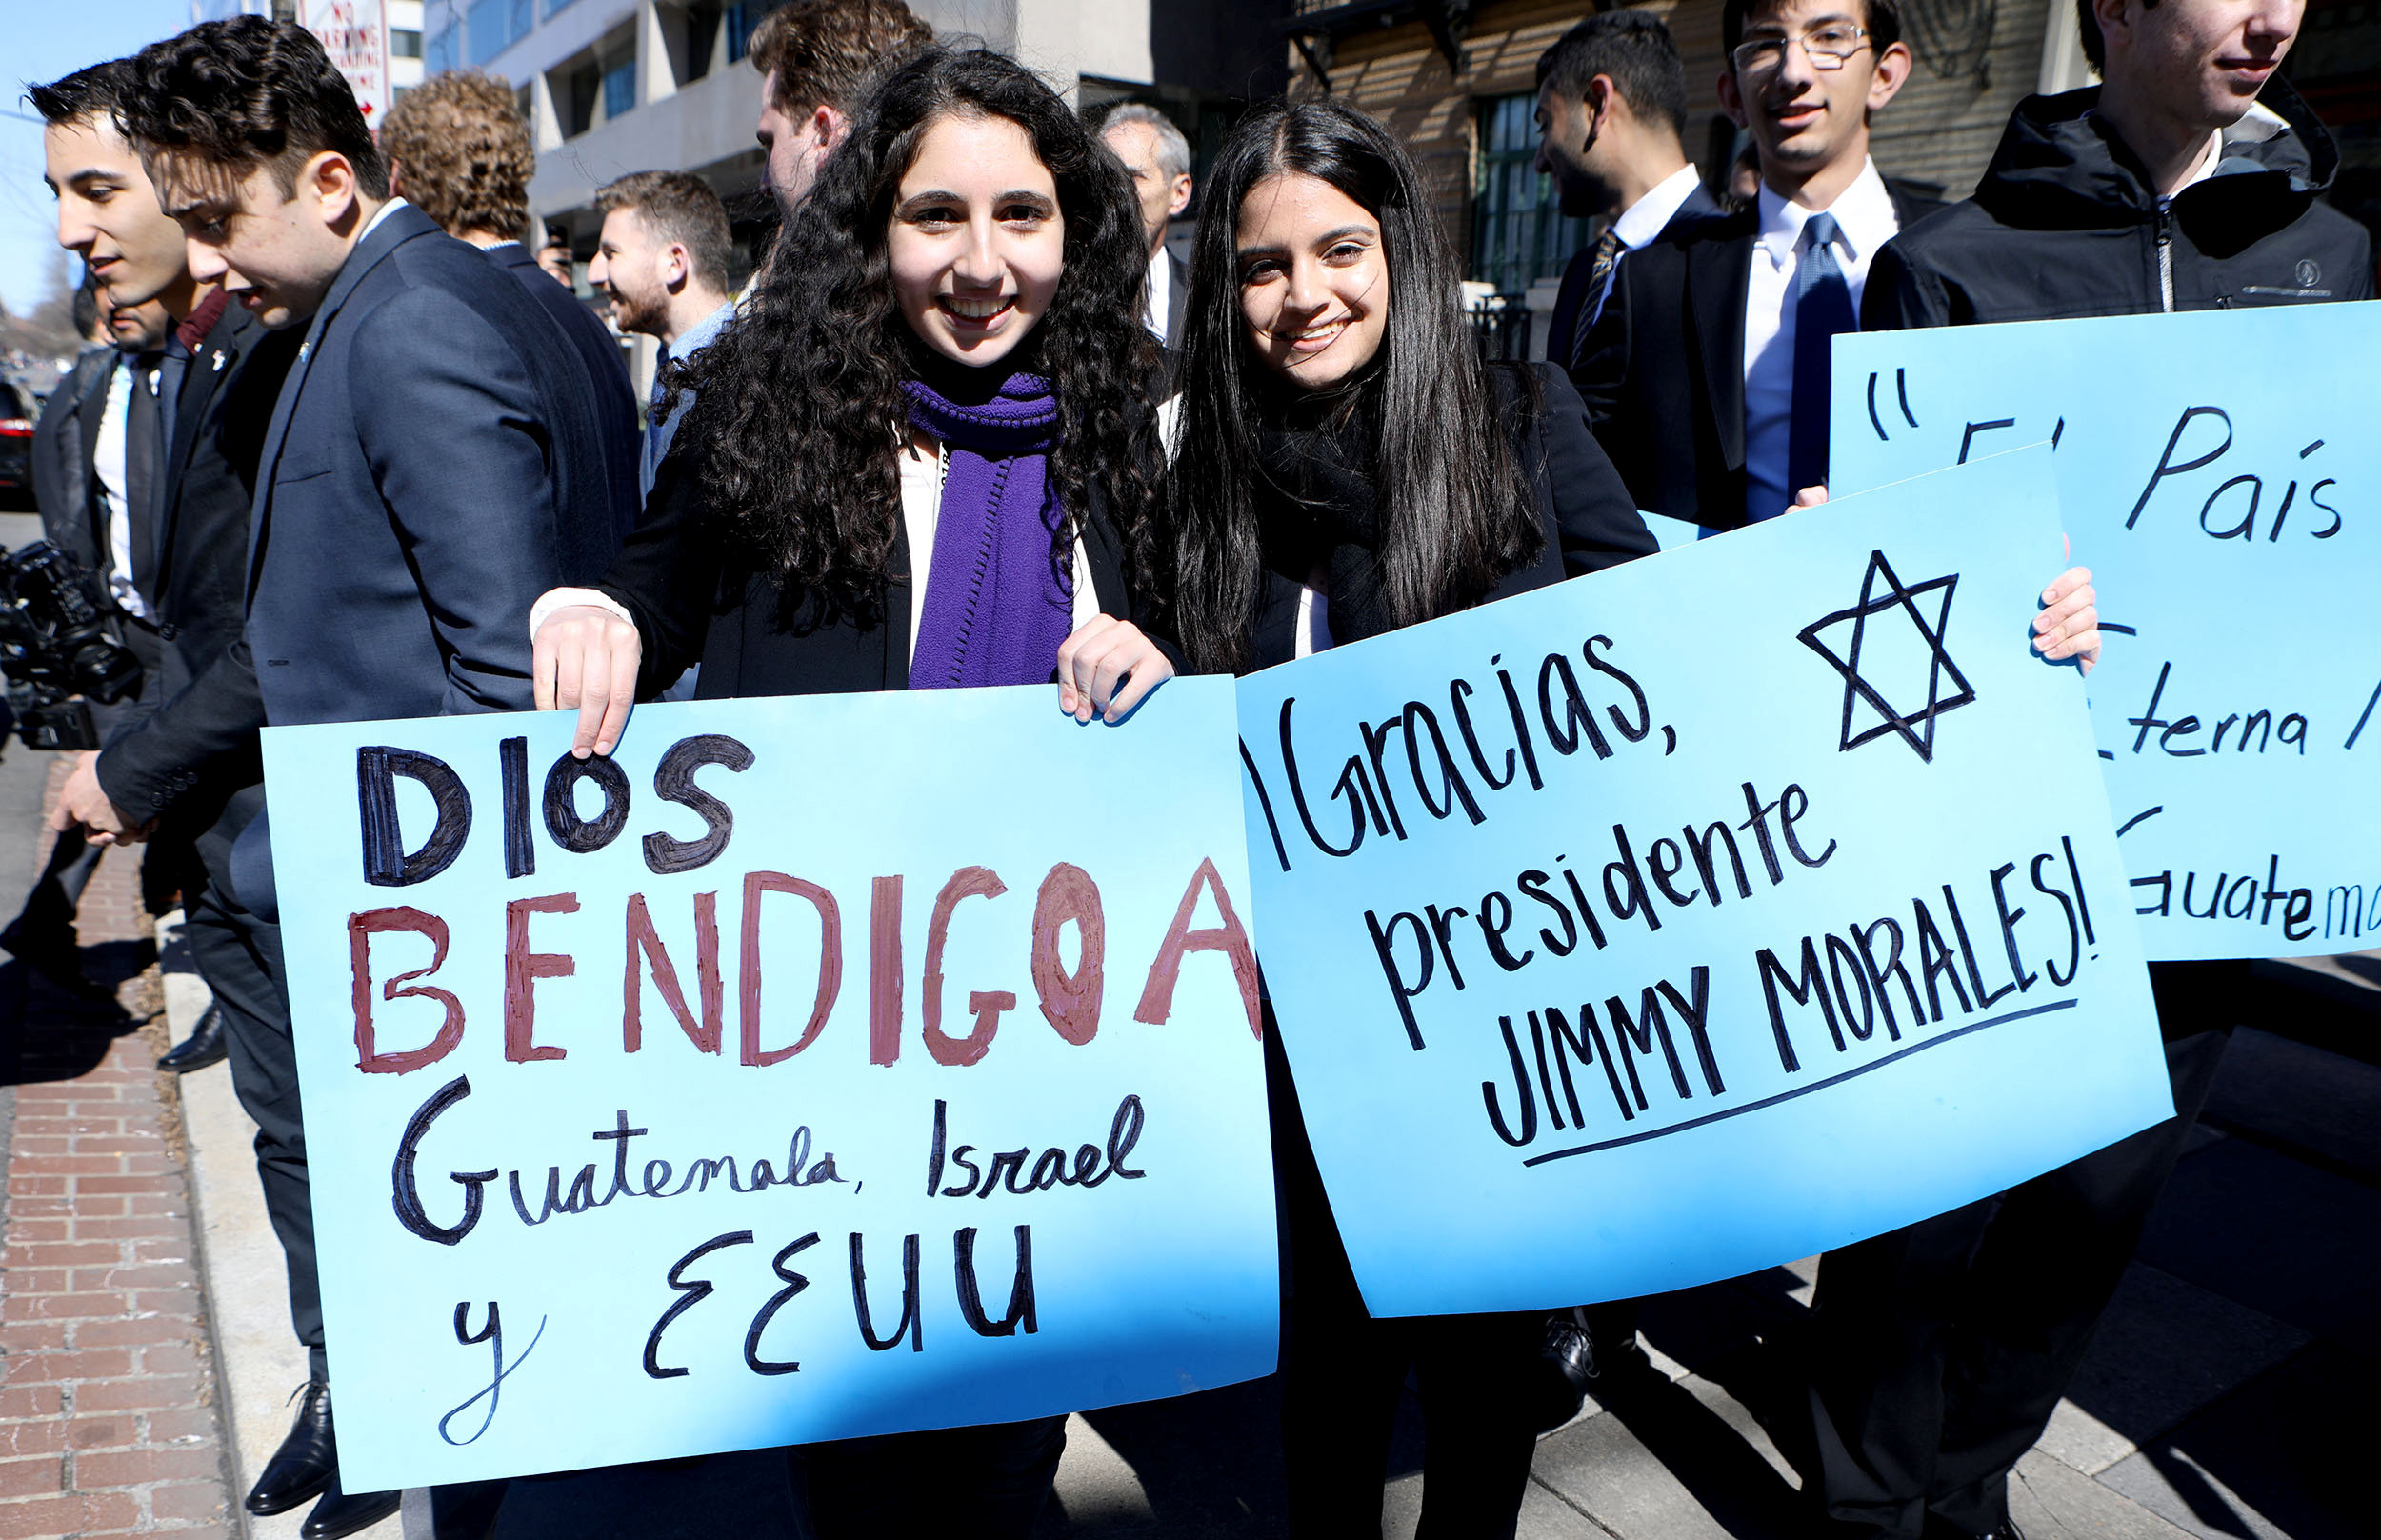 Members of the Israel community support Guatemalan President Morales in Washington. Placard reads 